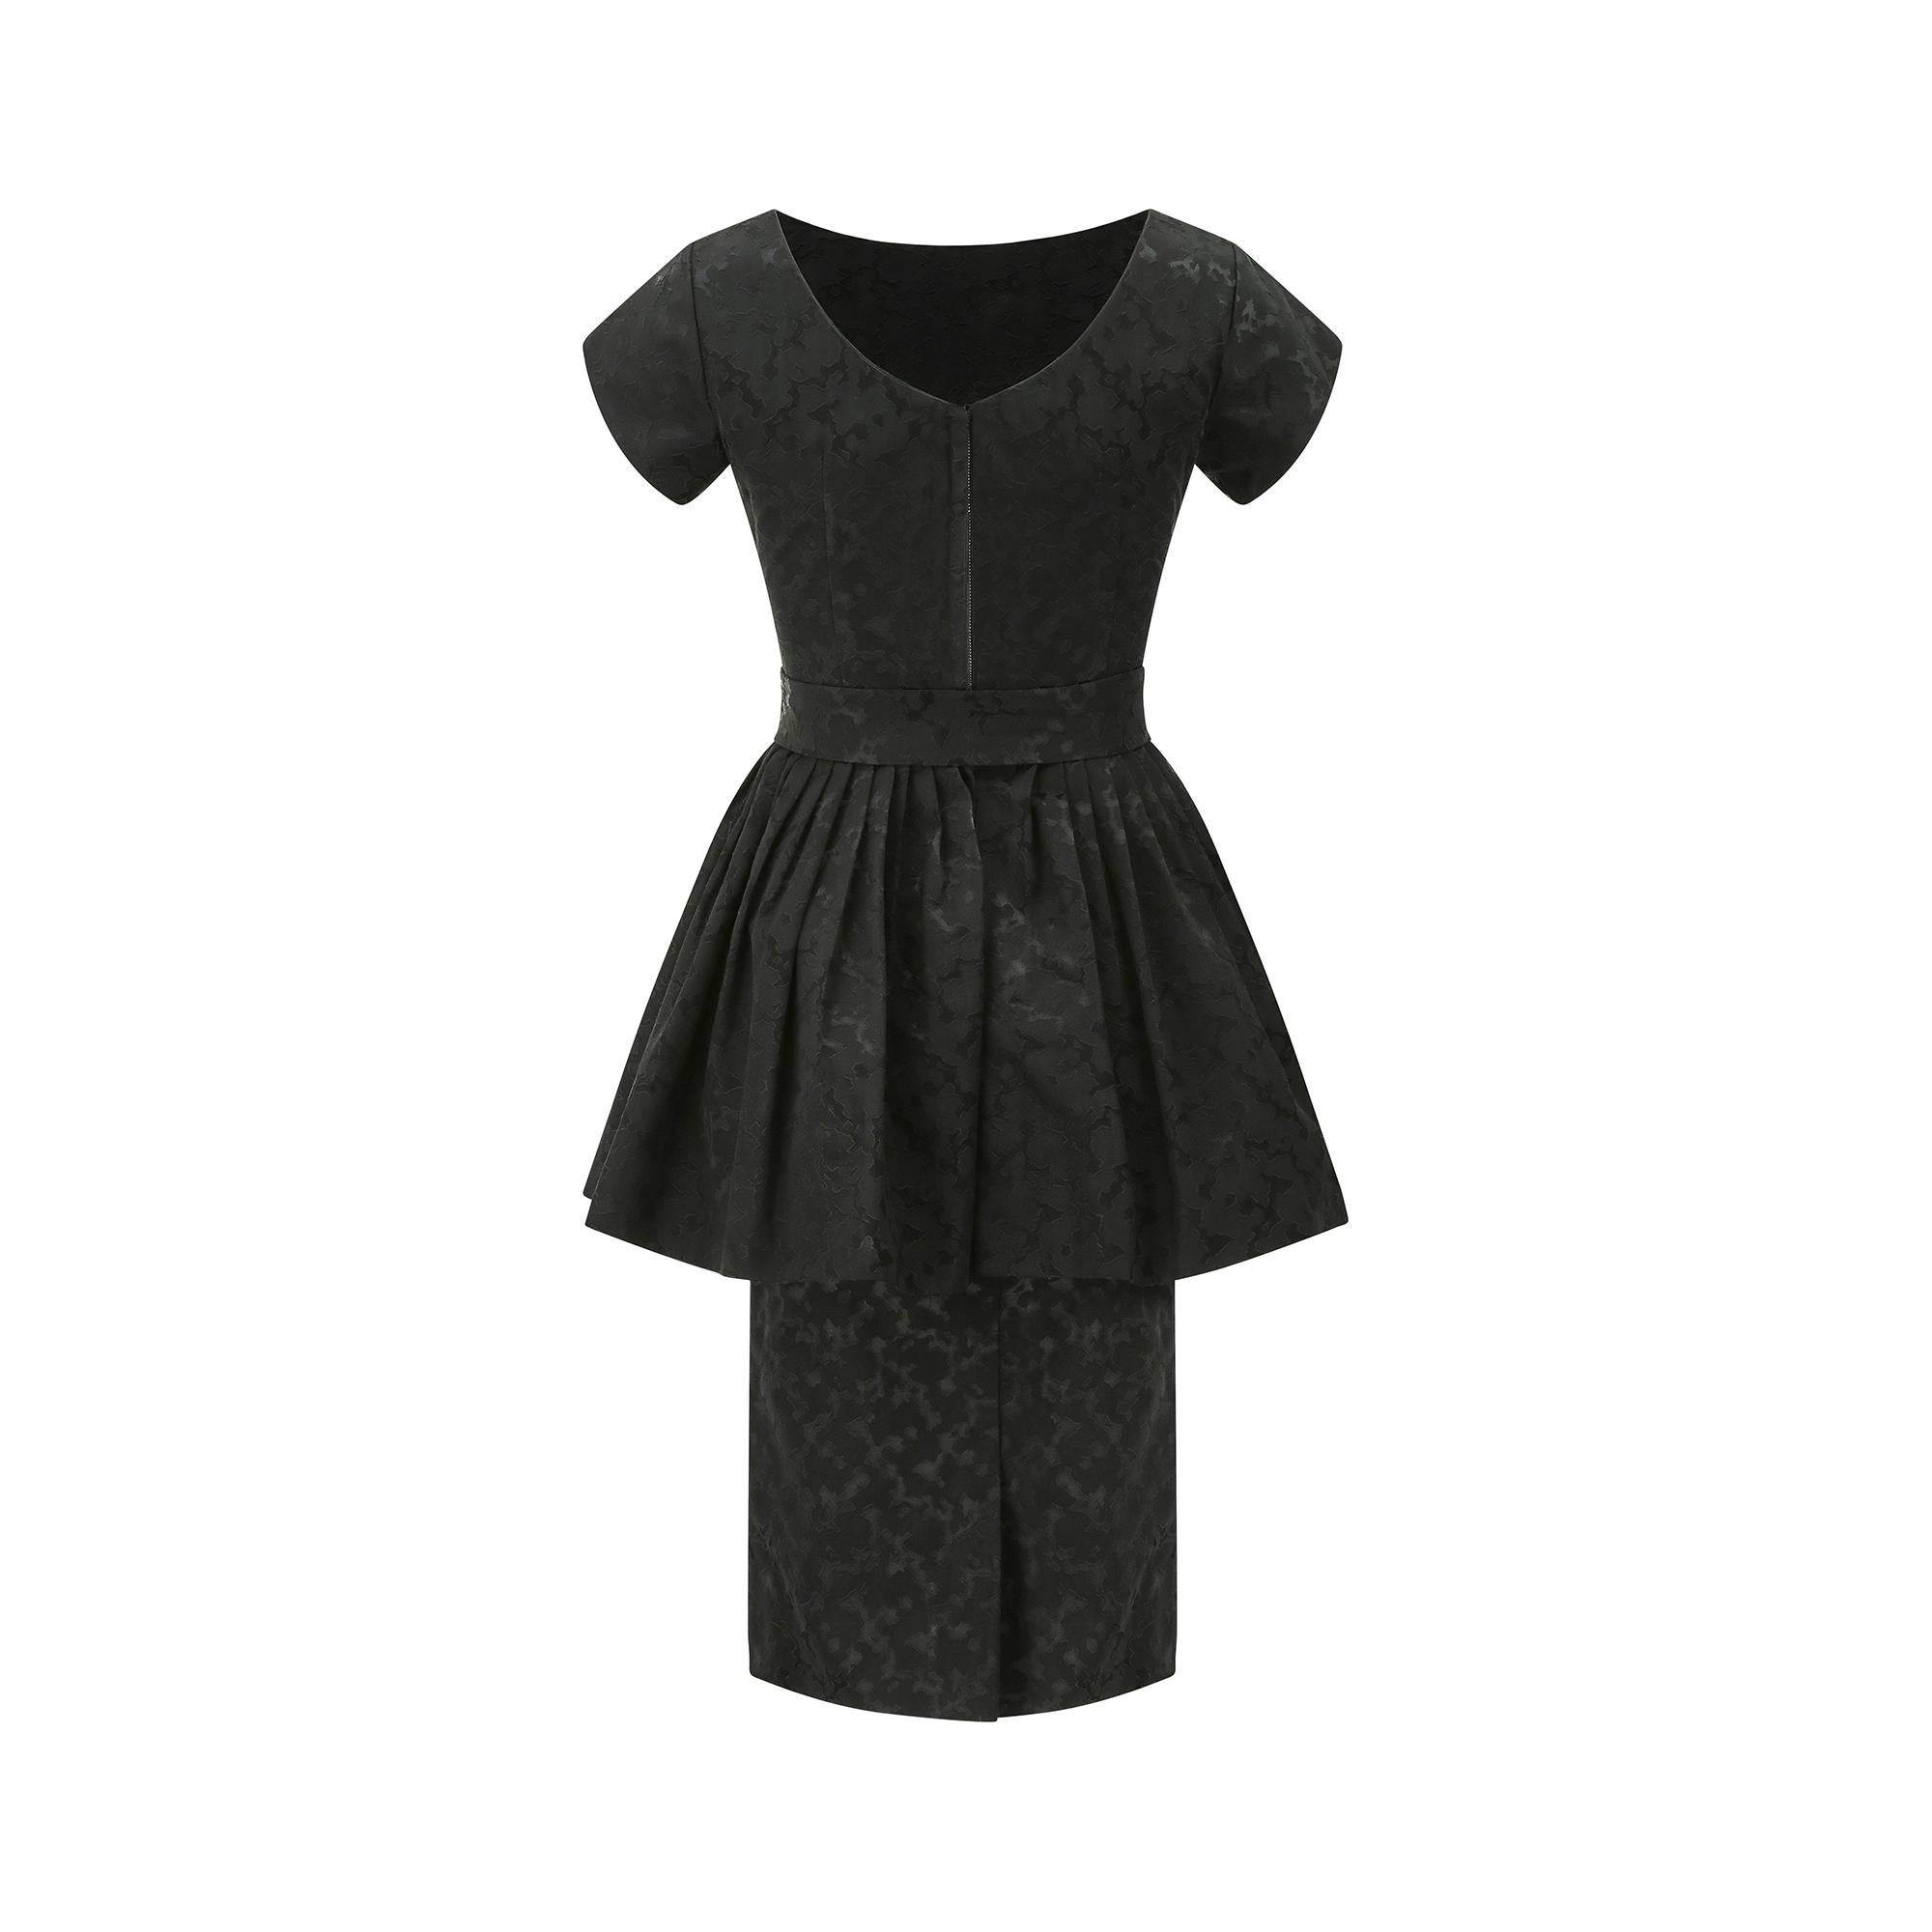 Women's 1950s Black Textured Jacquard Dress with Peplum For Sale